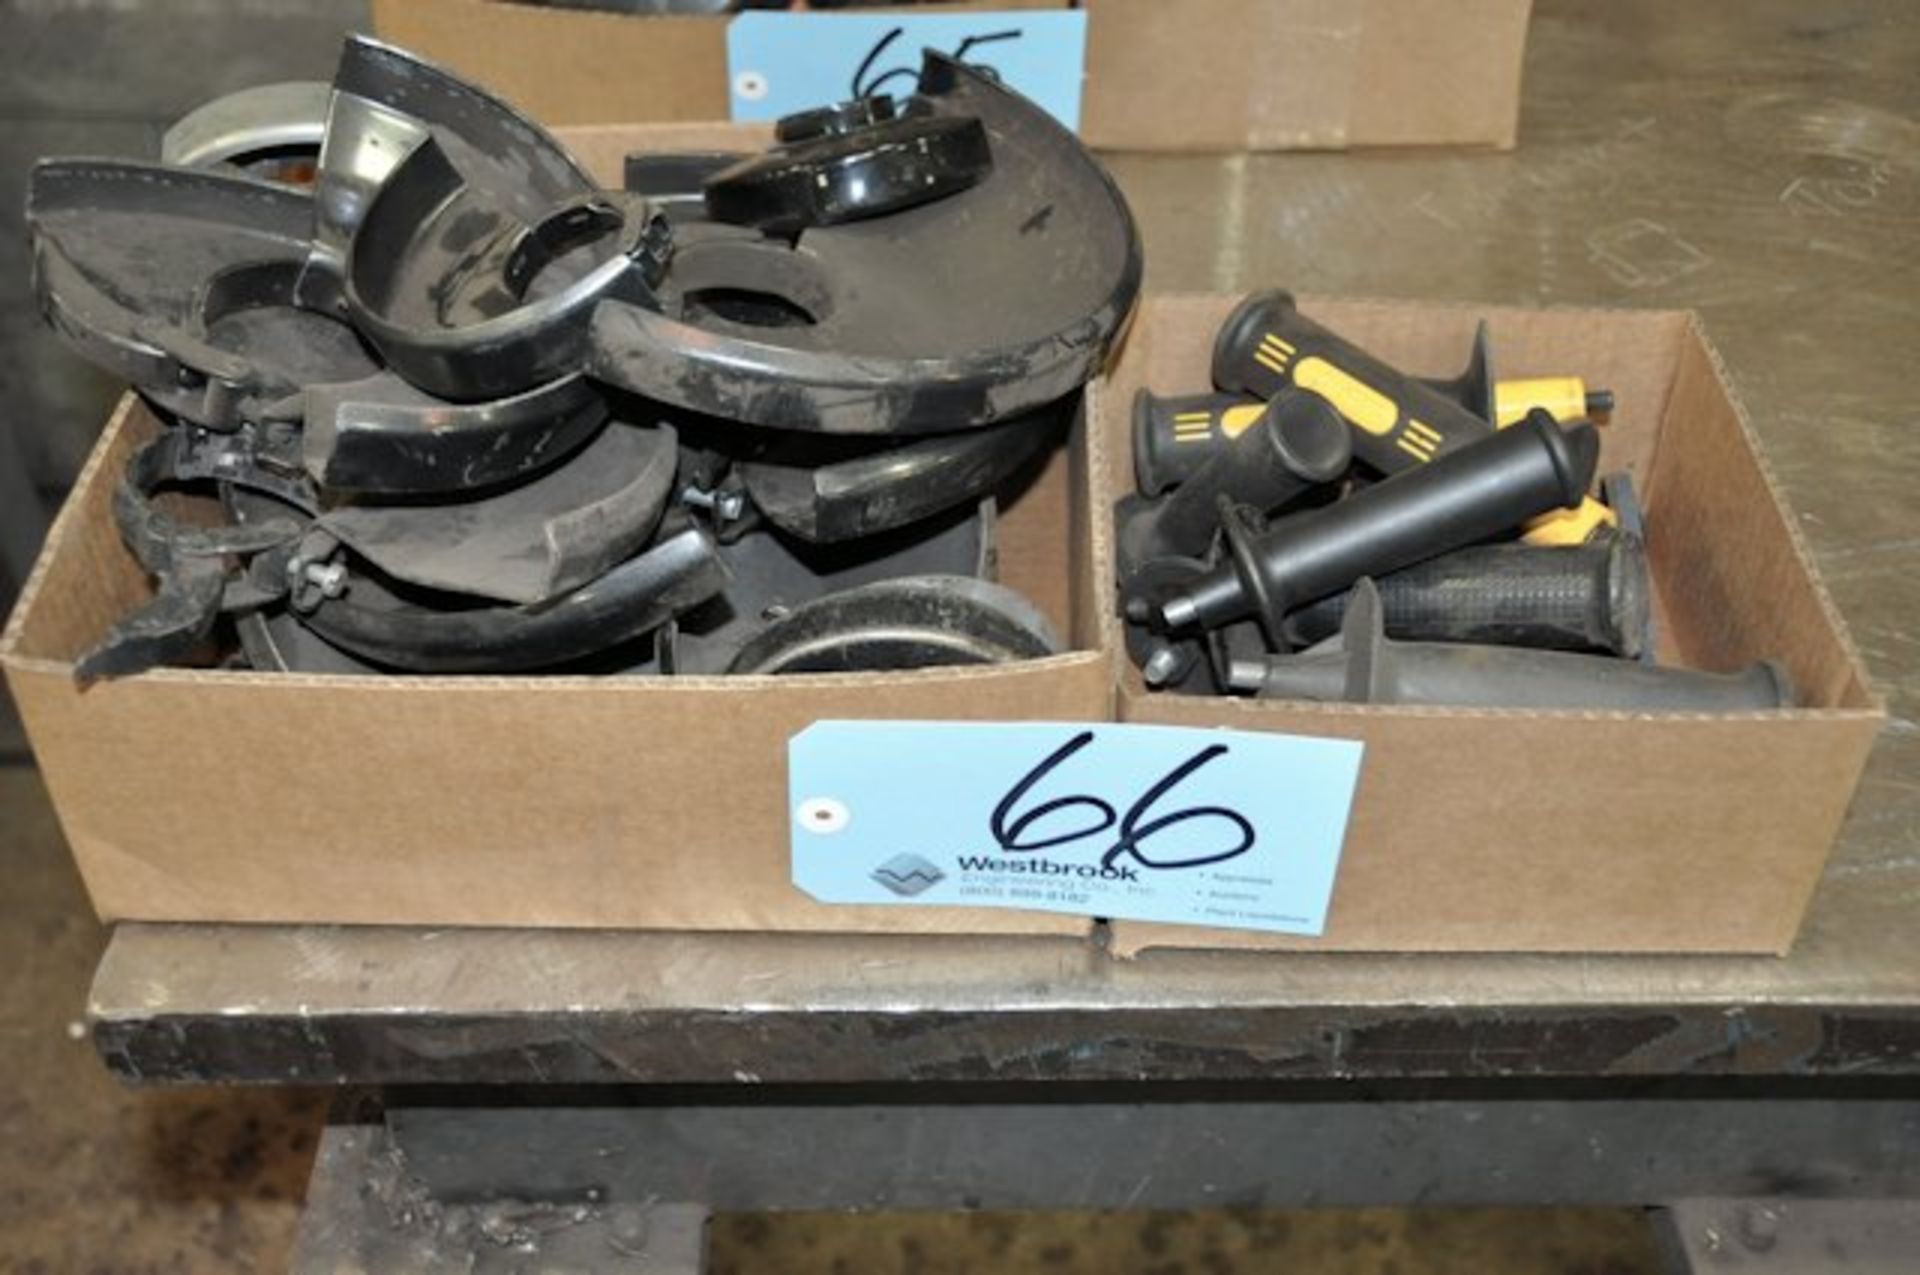 Lot-Grinder Guards and Handles in (2) Boxes